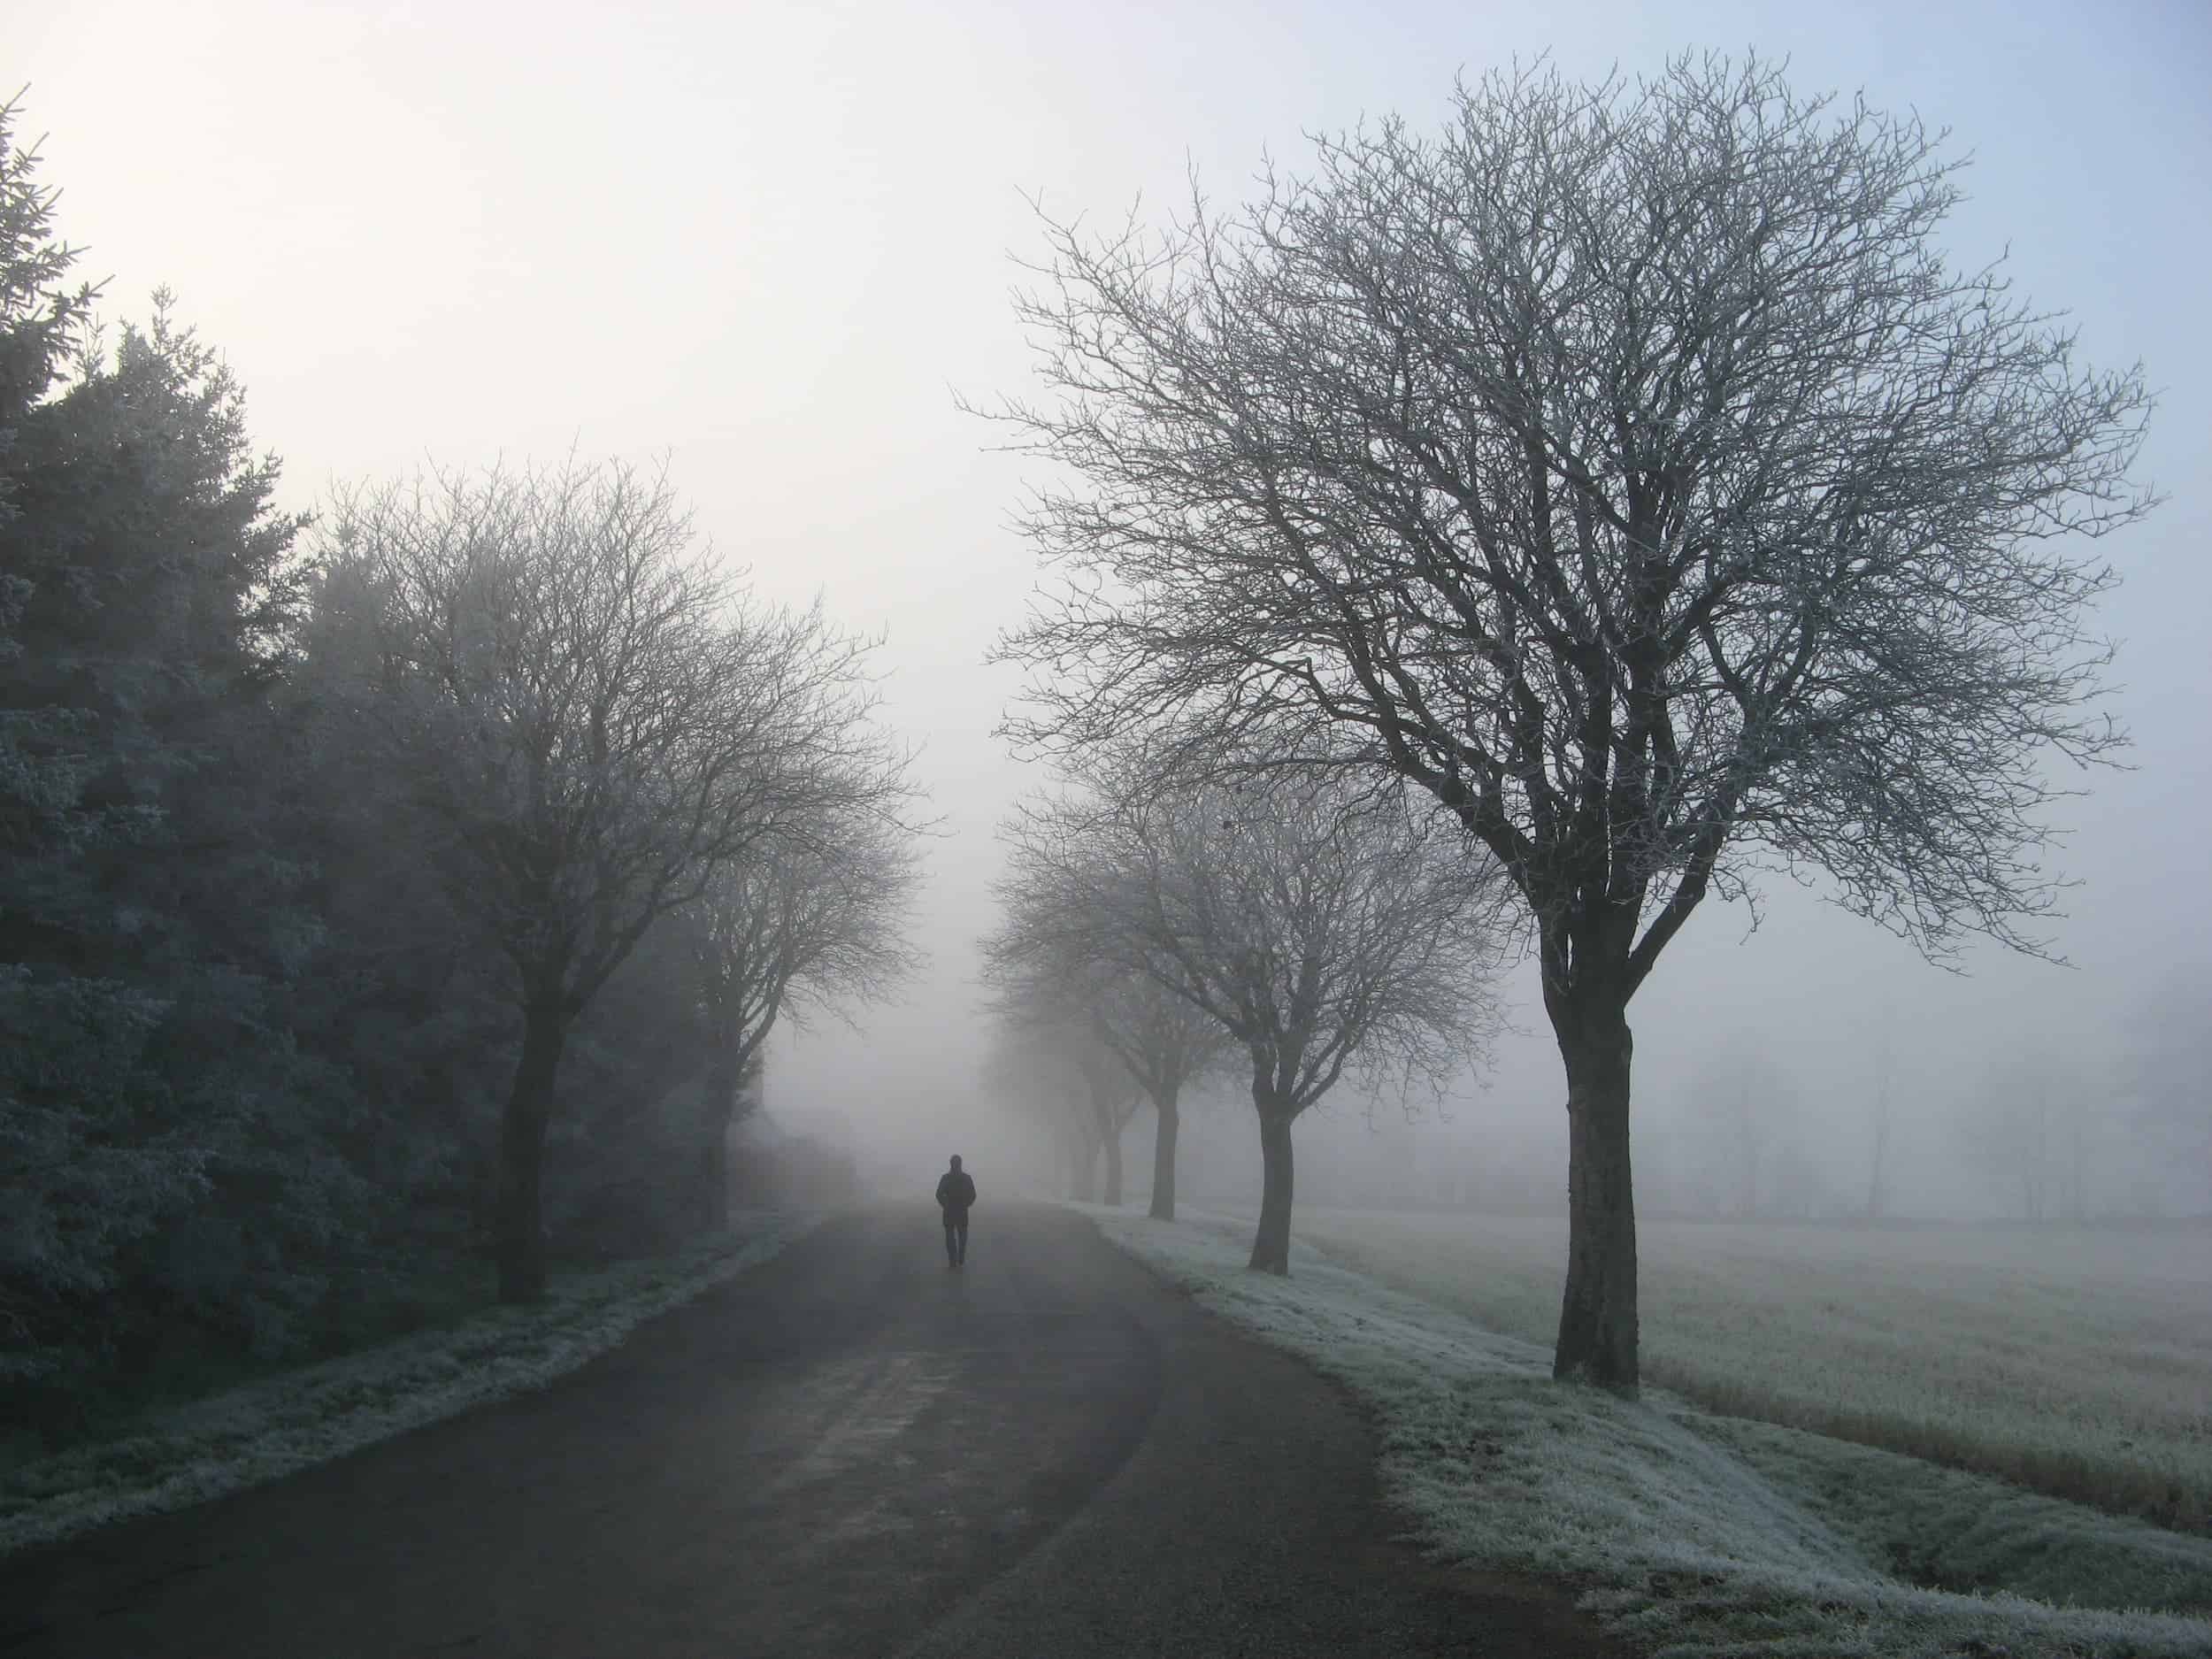 Person walking in fog down a path lined with bare trees